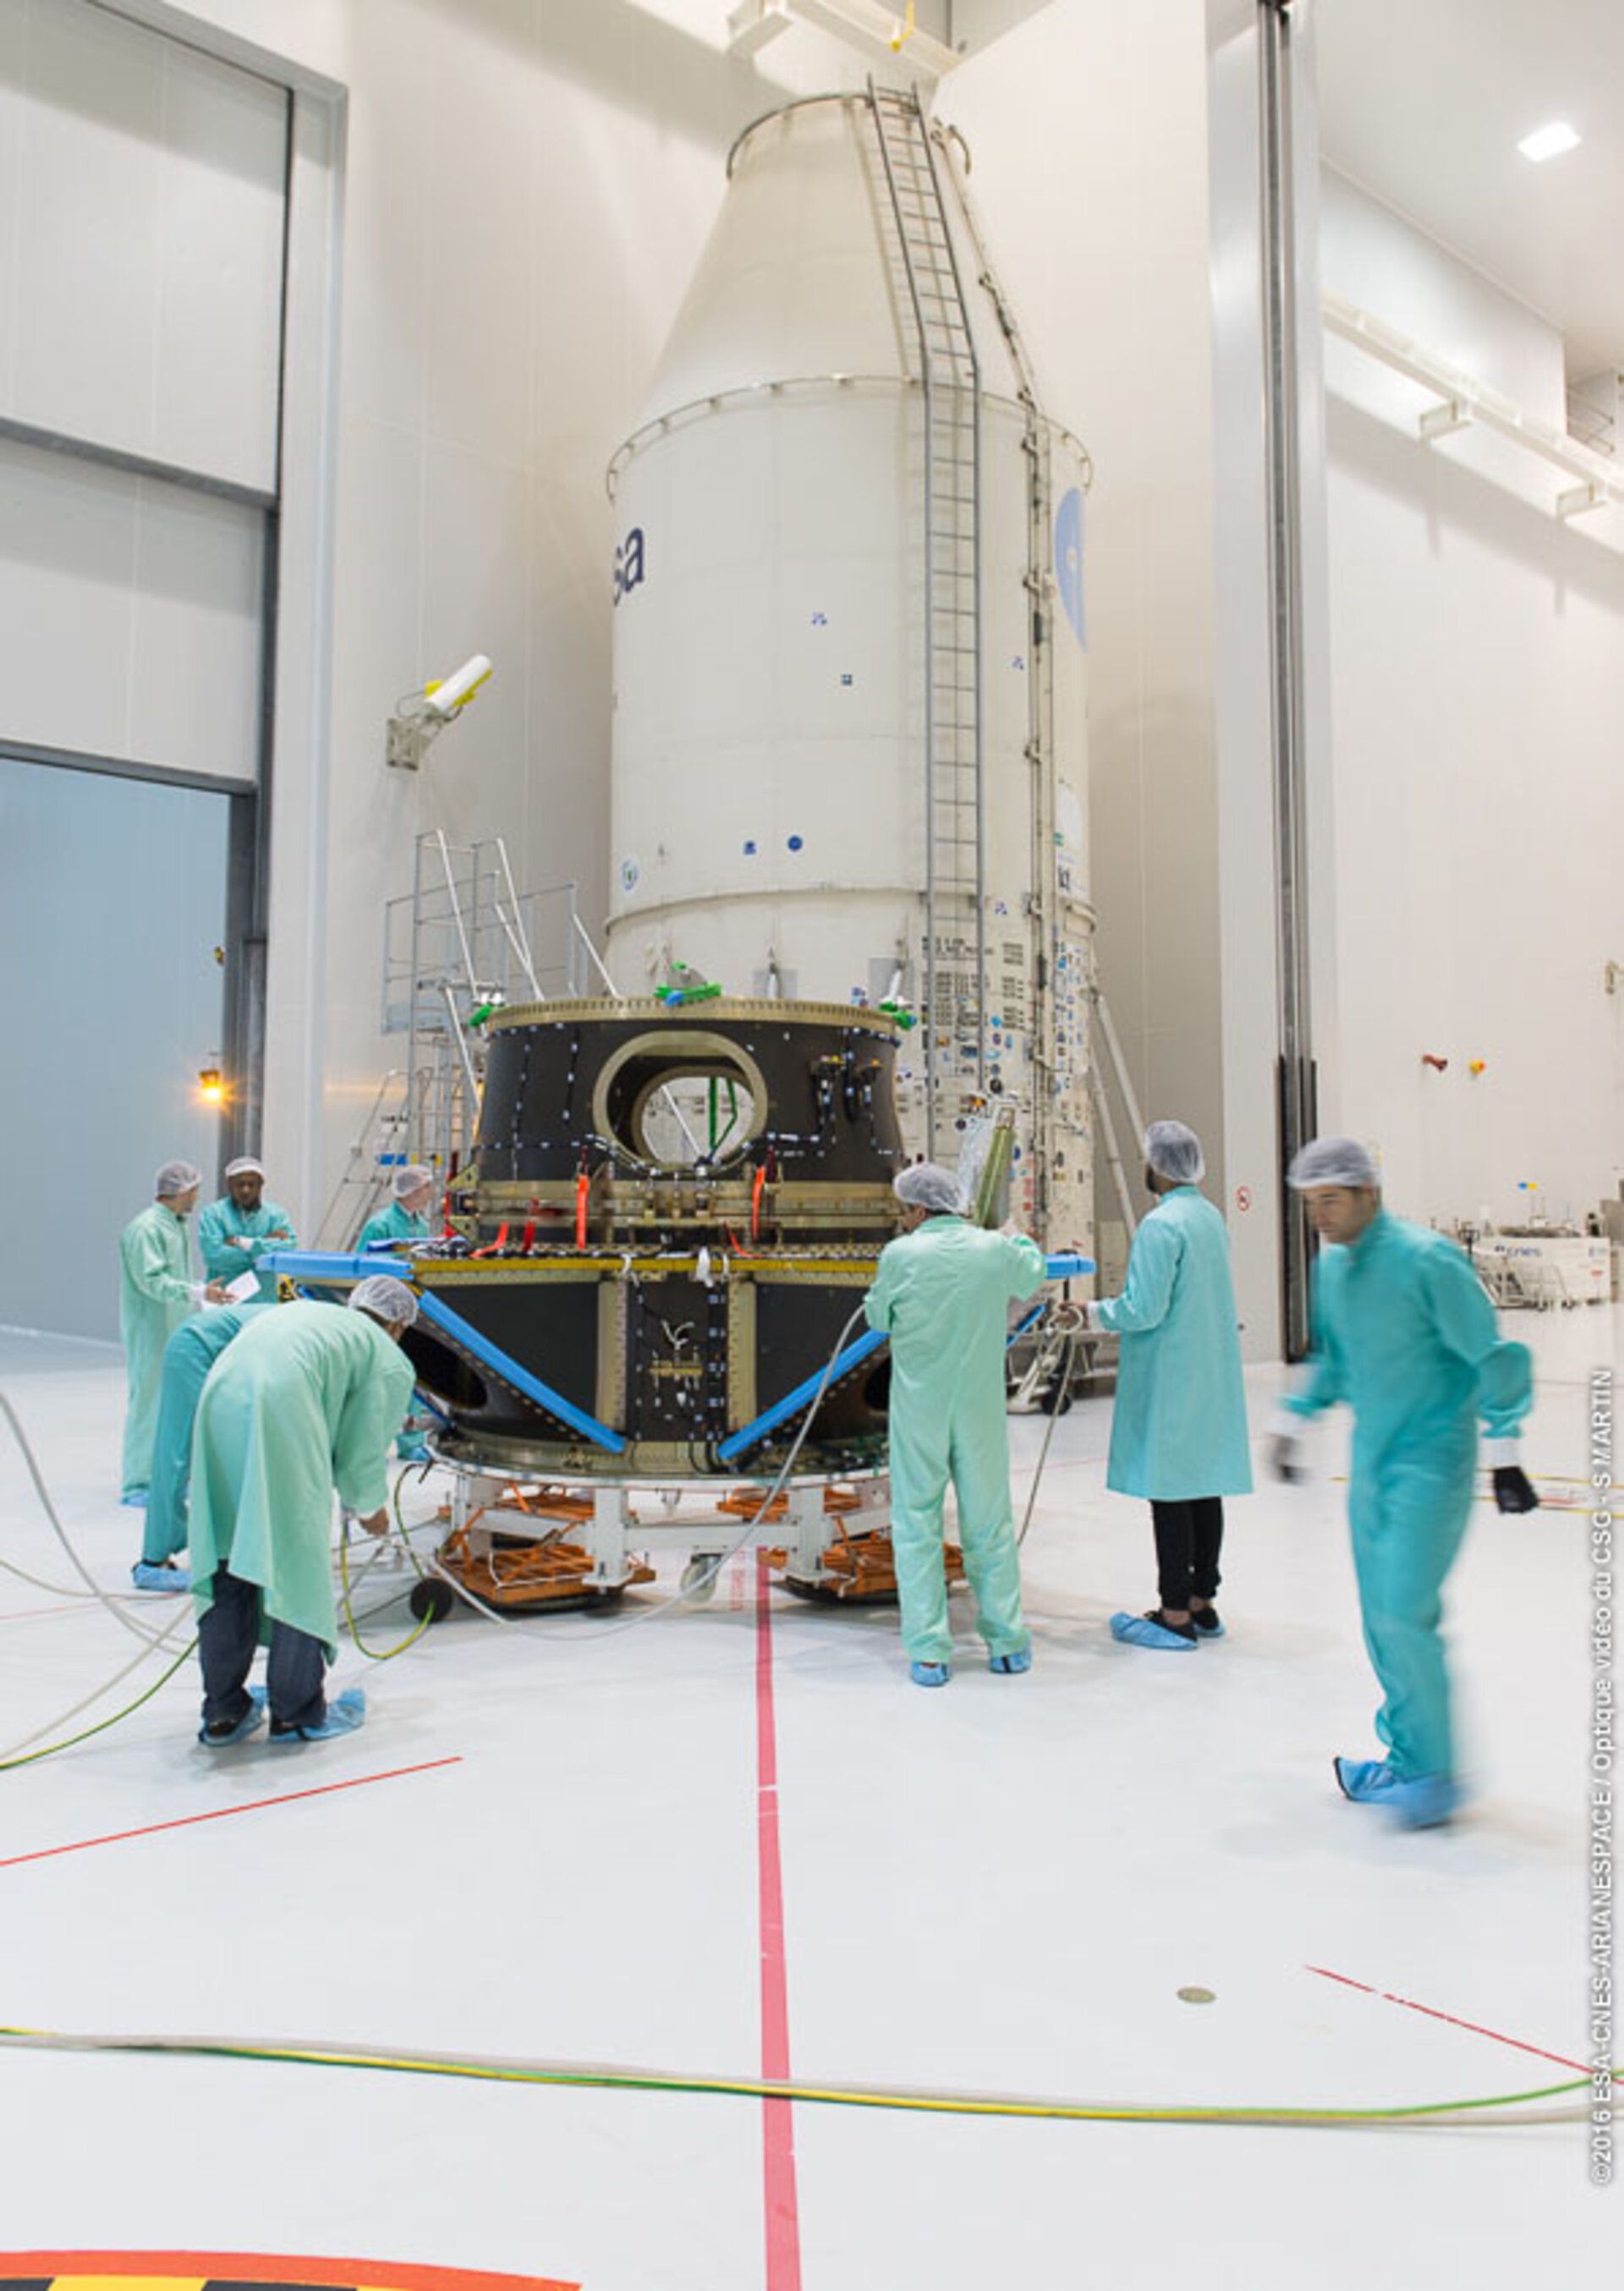 ASAP-S, with P-POD and CubeSats,  is moved to another cleanroom 